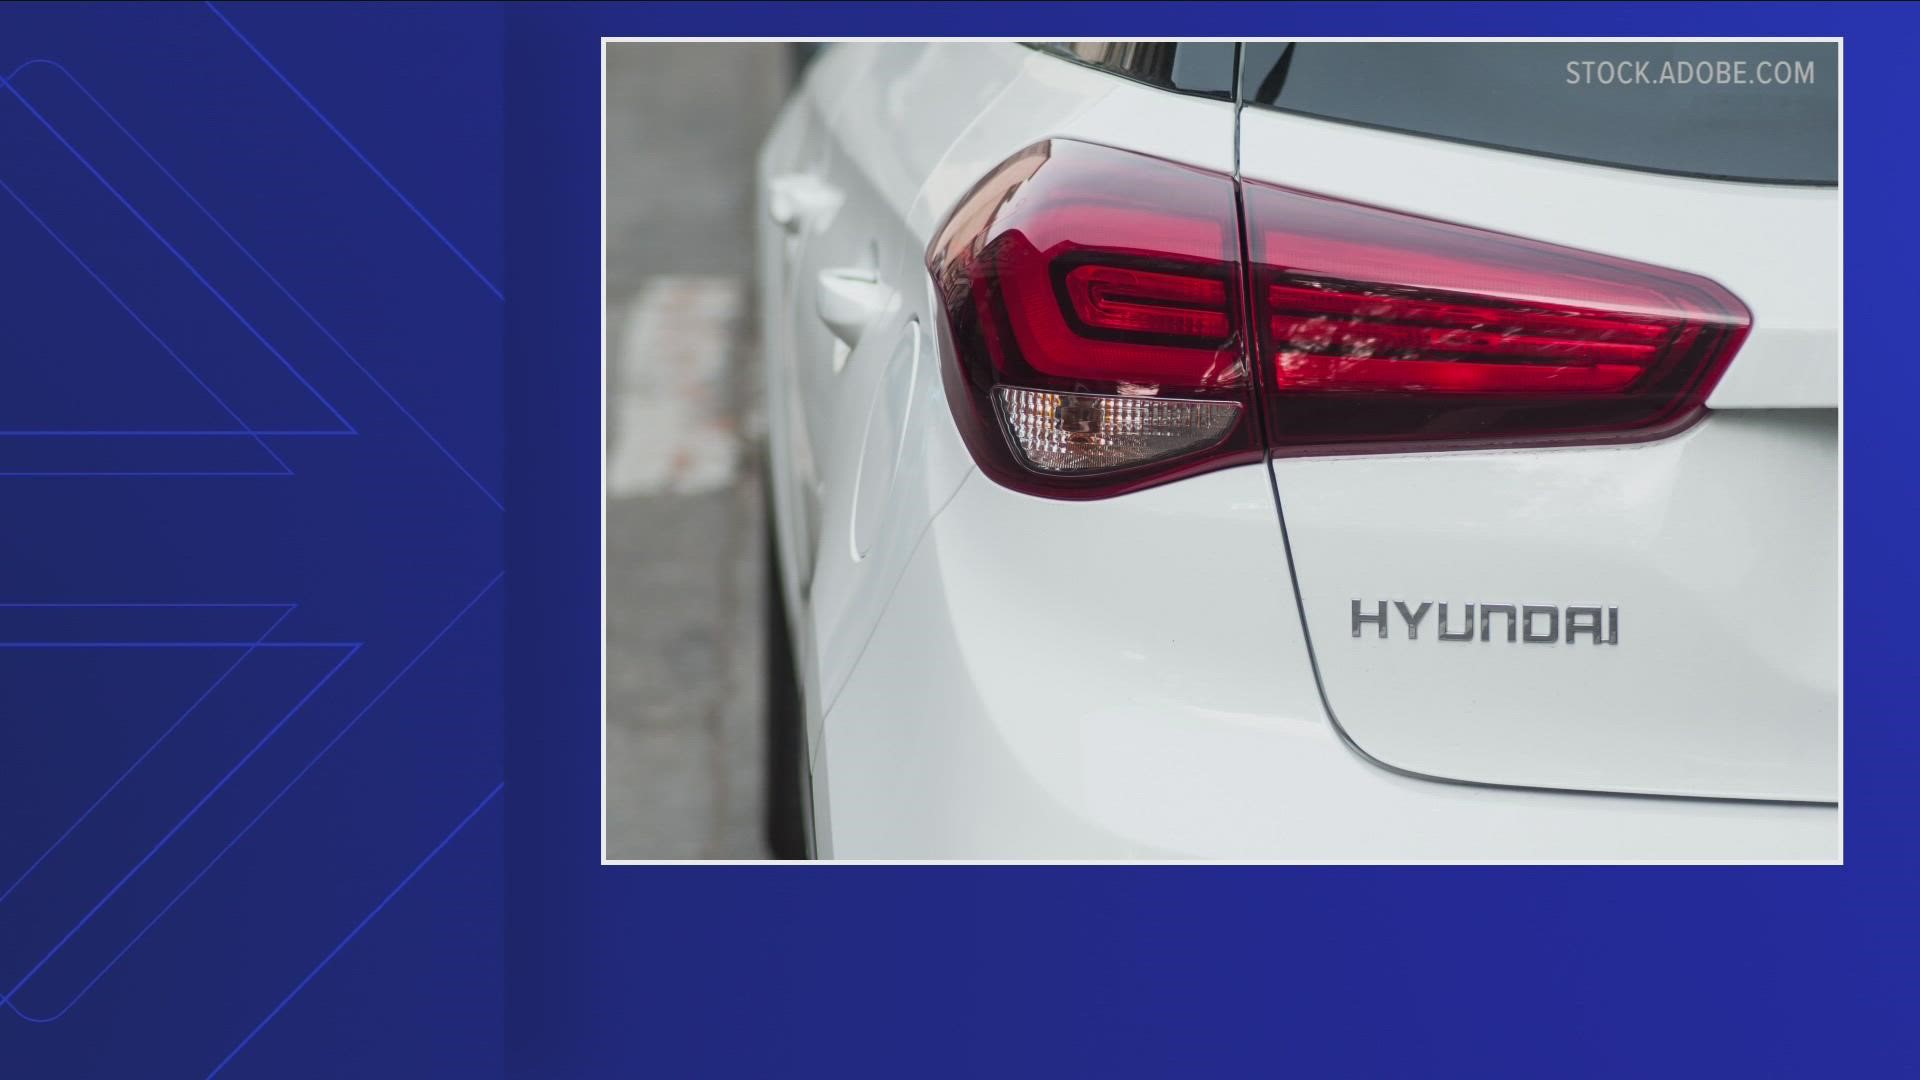 Police say thieves are targeting KIA models from 2011 to 2021 and Hyundai models from 2015 to 2021.